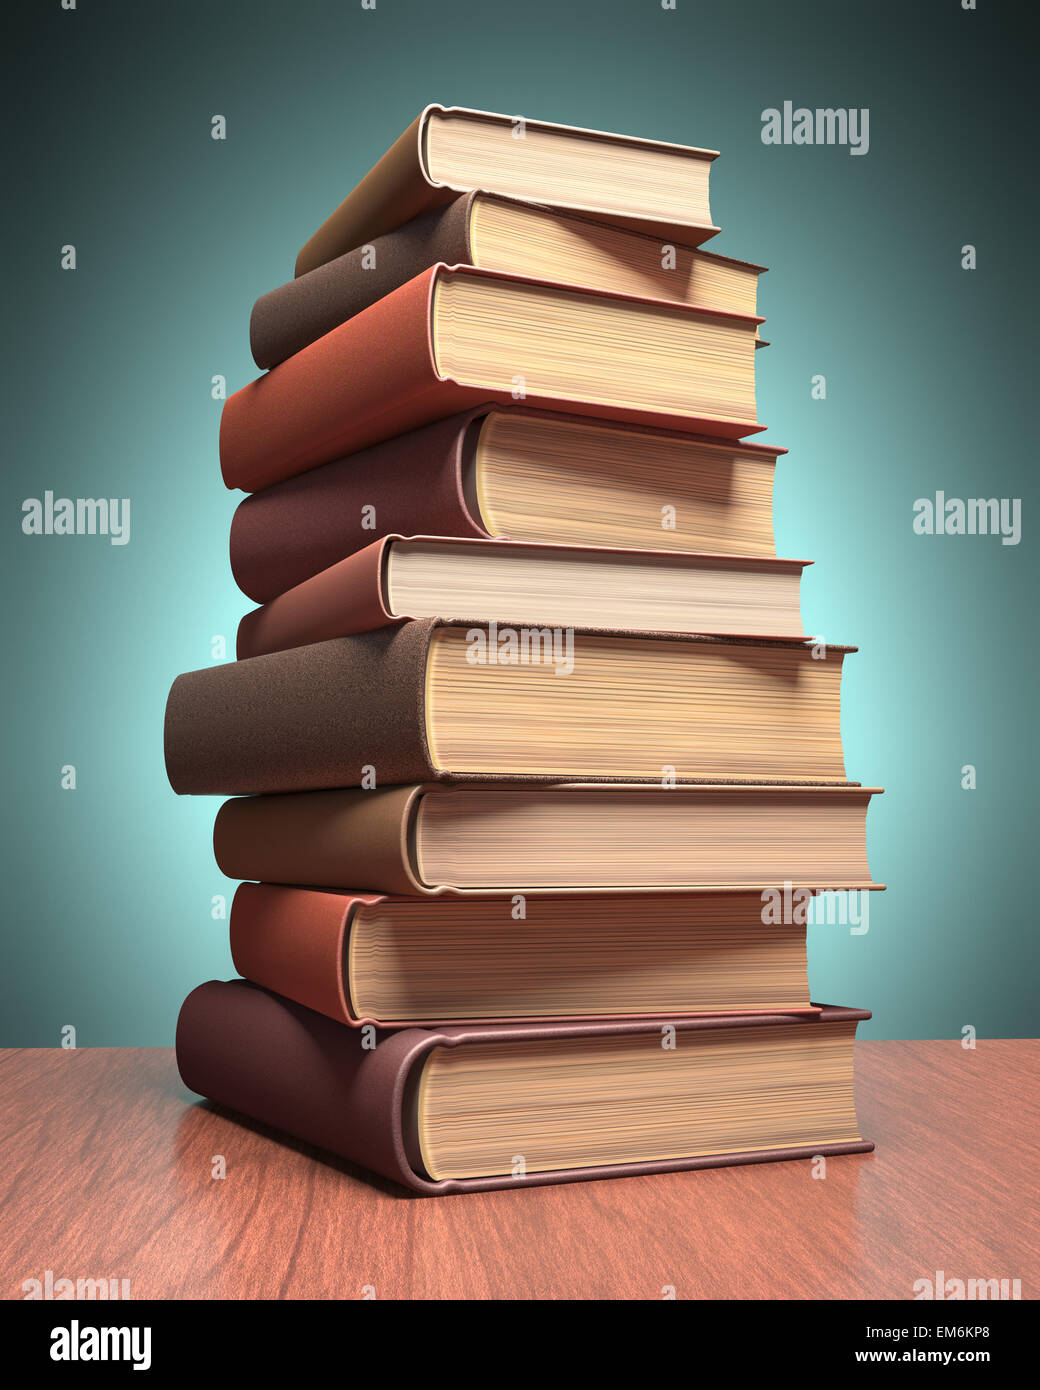 Several books stacked on the table. Clipping path included. Stock Photo